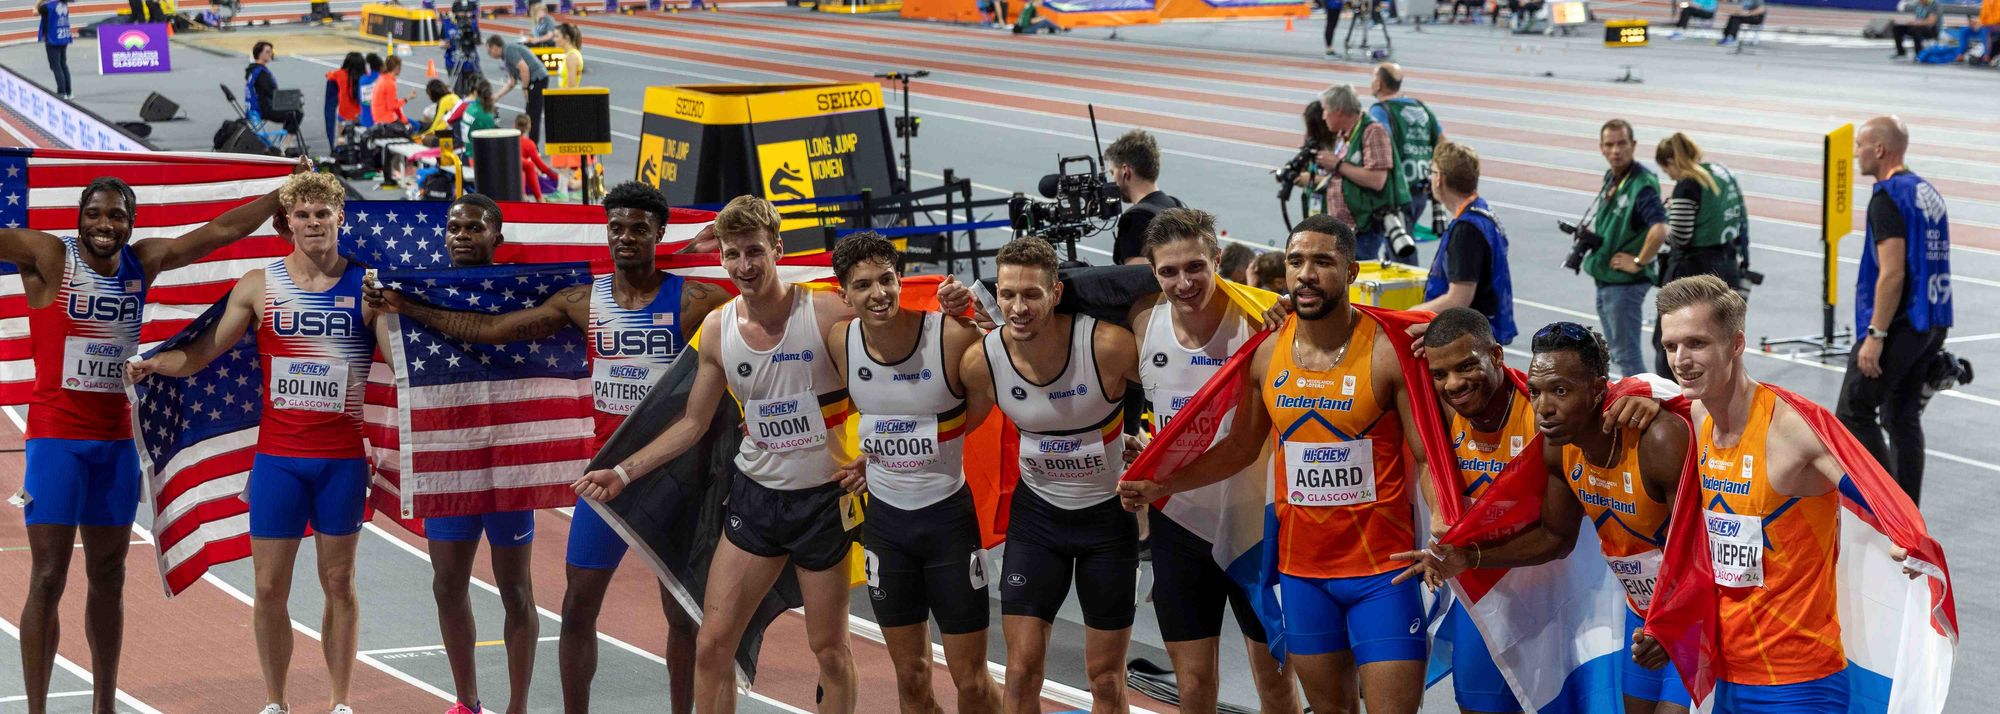 After three thrilling days of competition, the curtain came down on the 19th edition of the World Athletics Indoor Championships in Glasgow last night (Sunday 3 March).